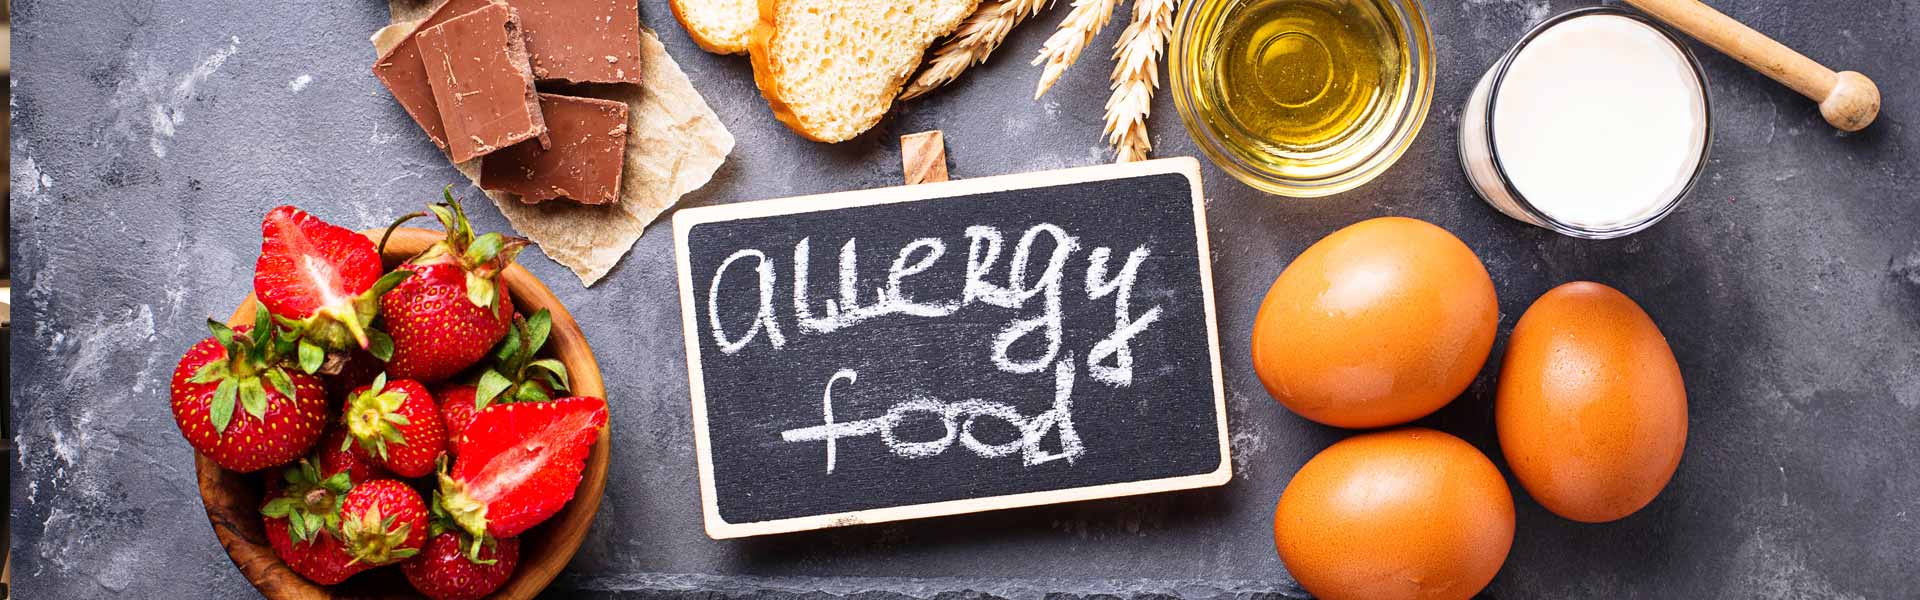 Potential allergy inducing foods